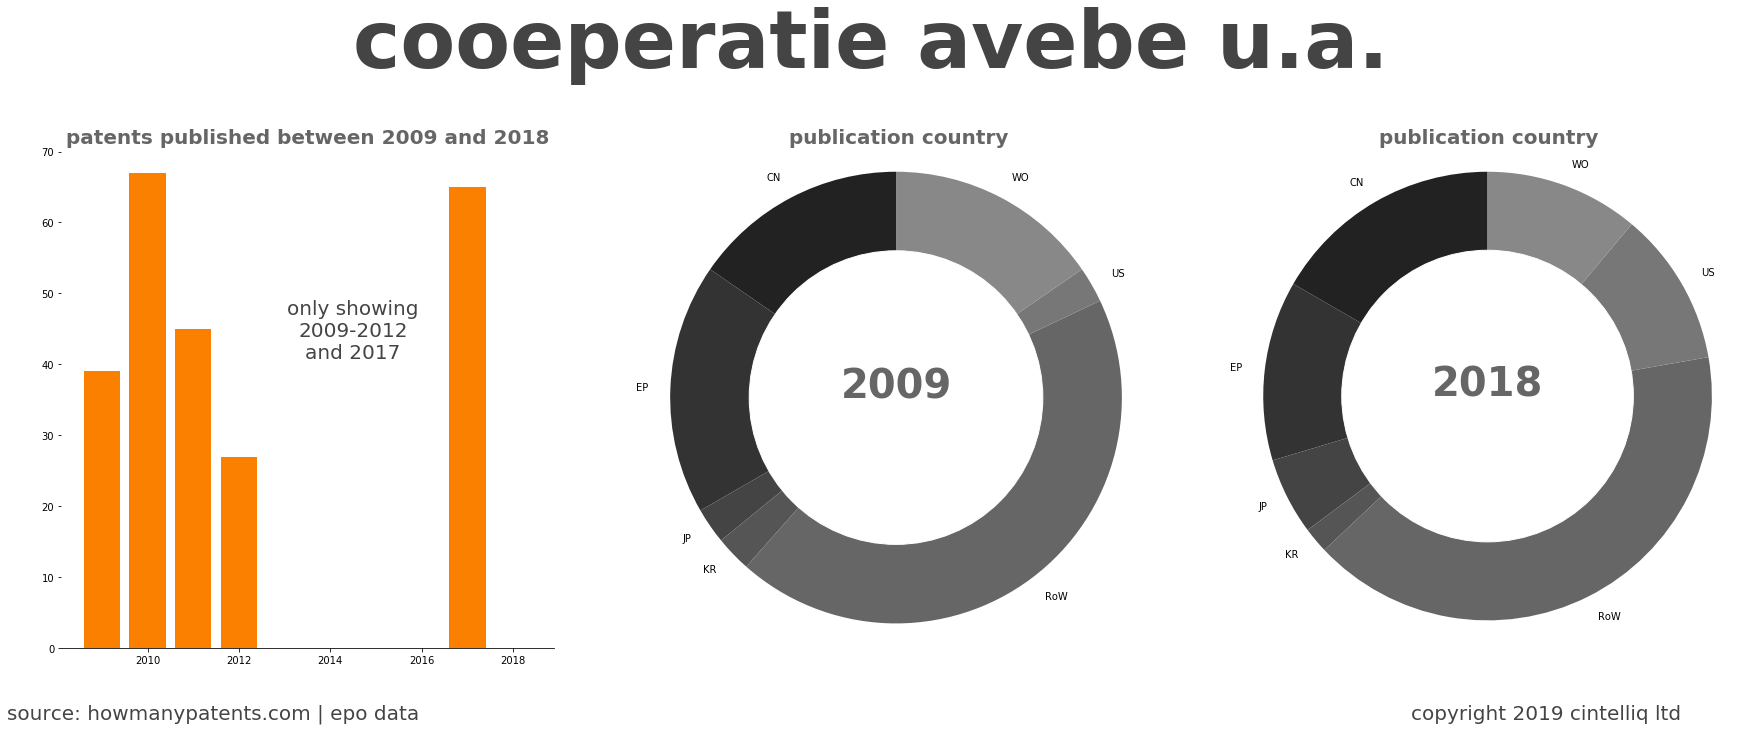 summary of patents for Cooeperatie Avebe U.A.